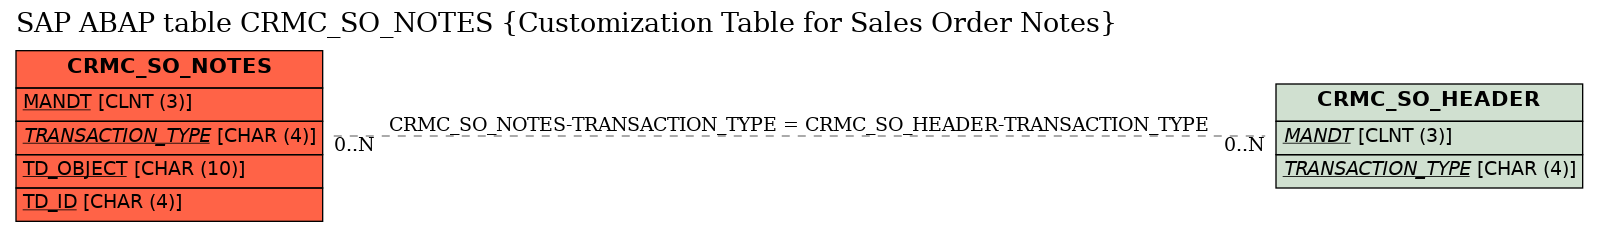 E-R Diagram for table CRMC_SO_NOTES (Customization Table for Sales Order Notes)